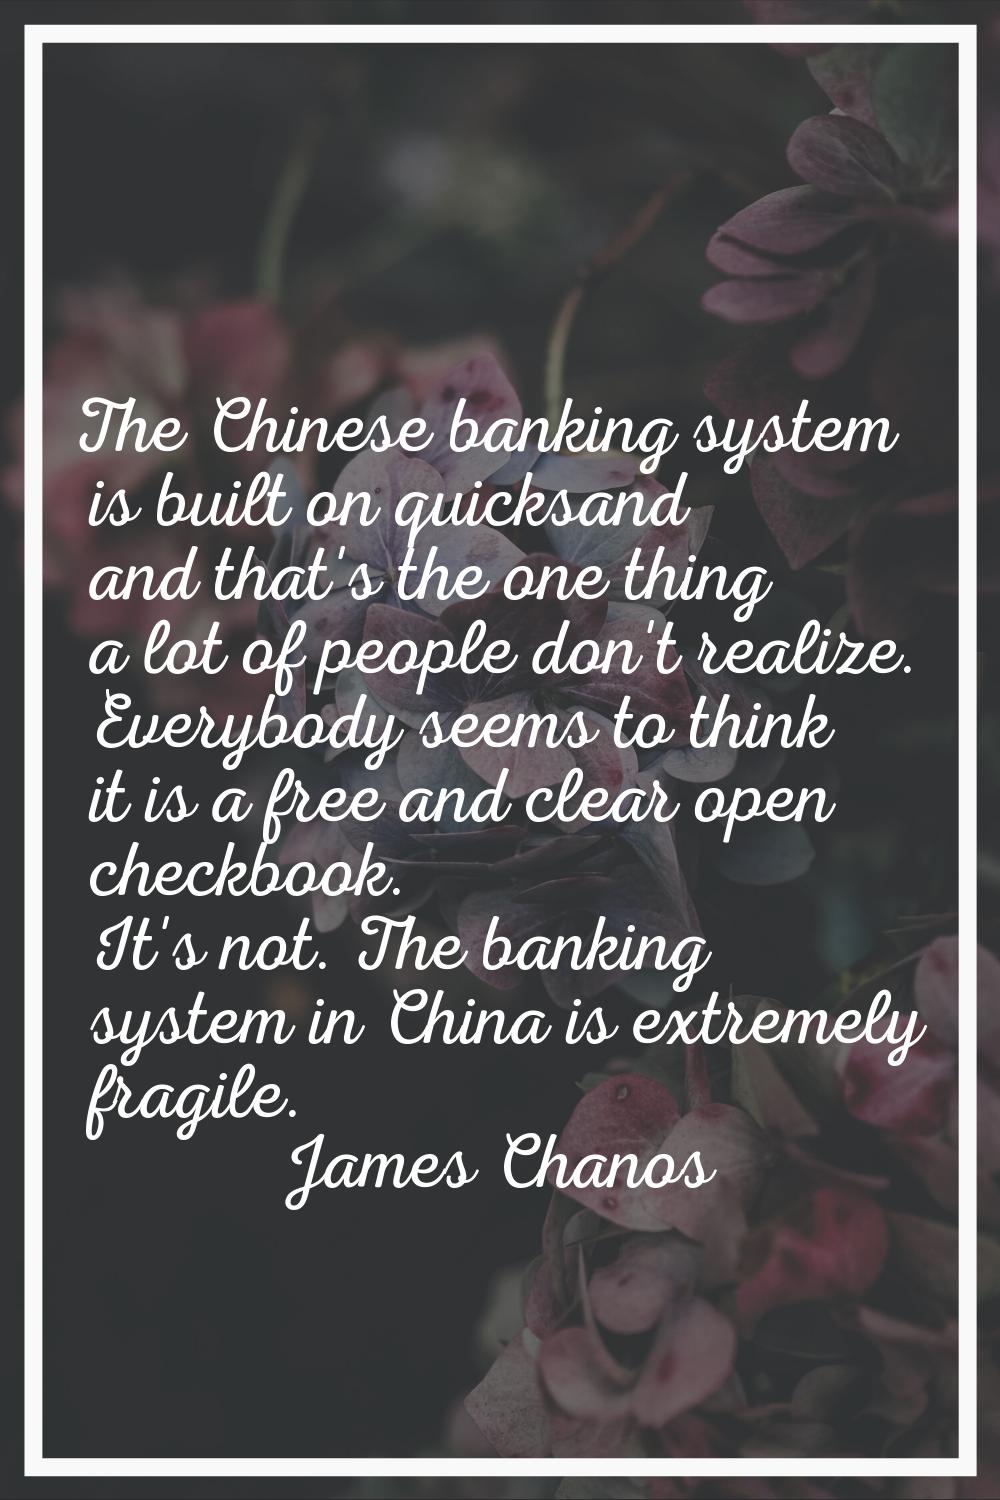 The Chinese banking system is built on quicksand and that's the one thing a lot of people don't rea